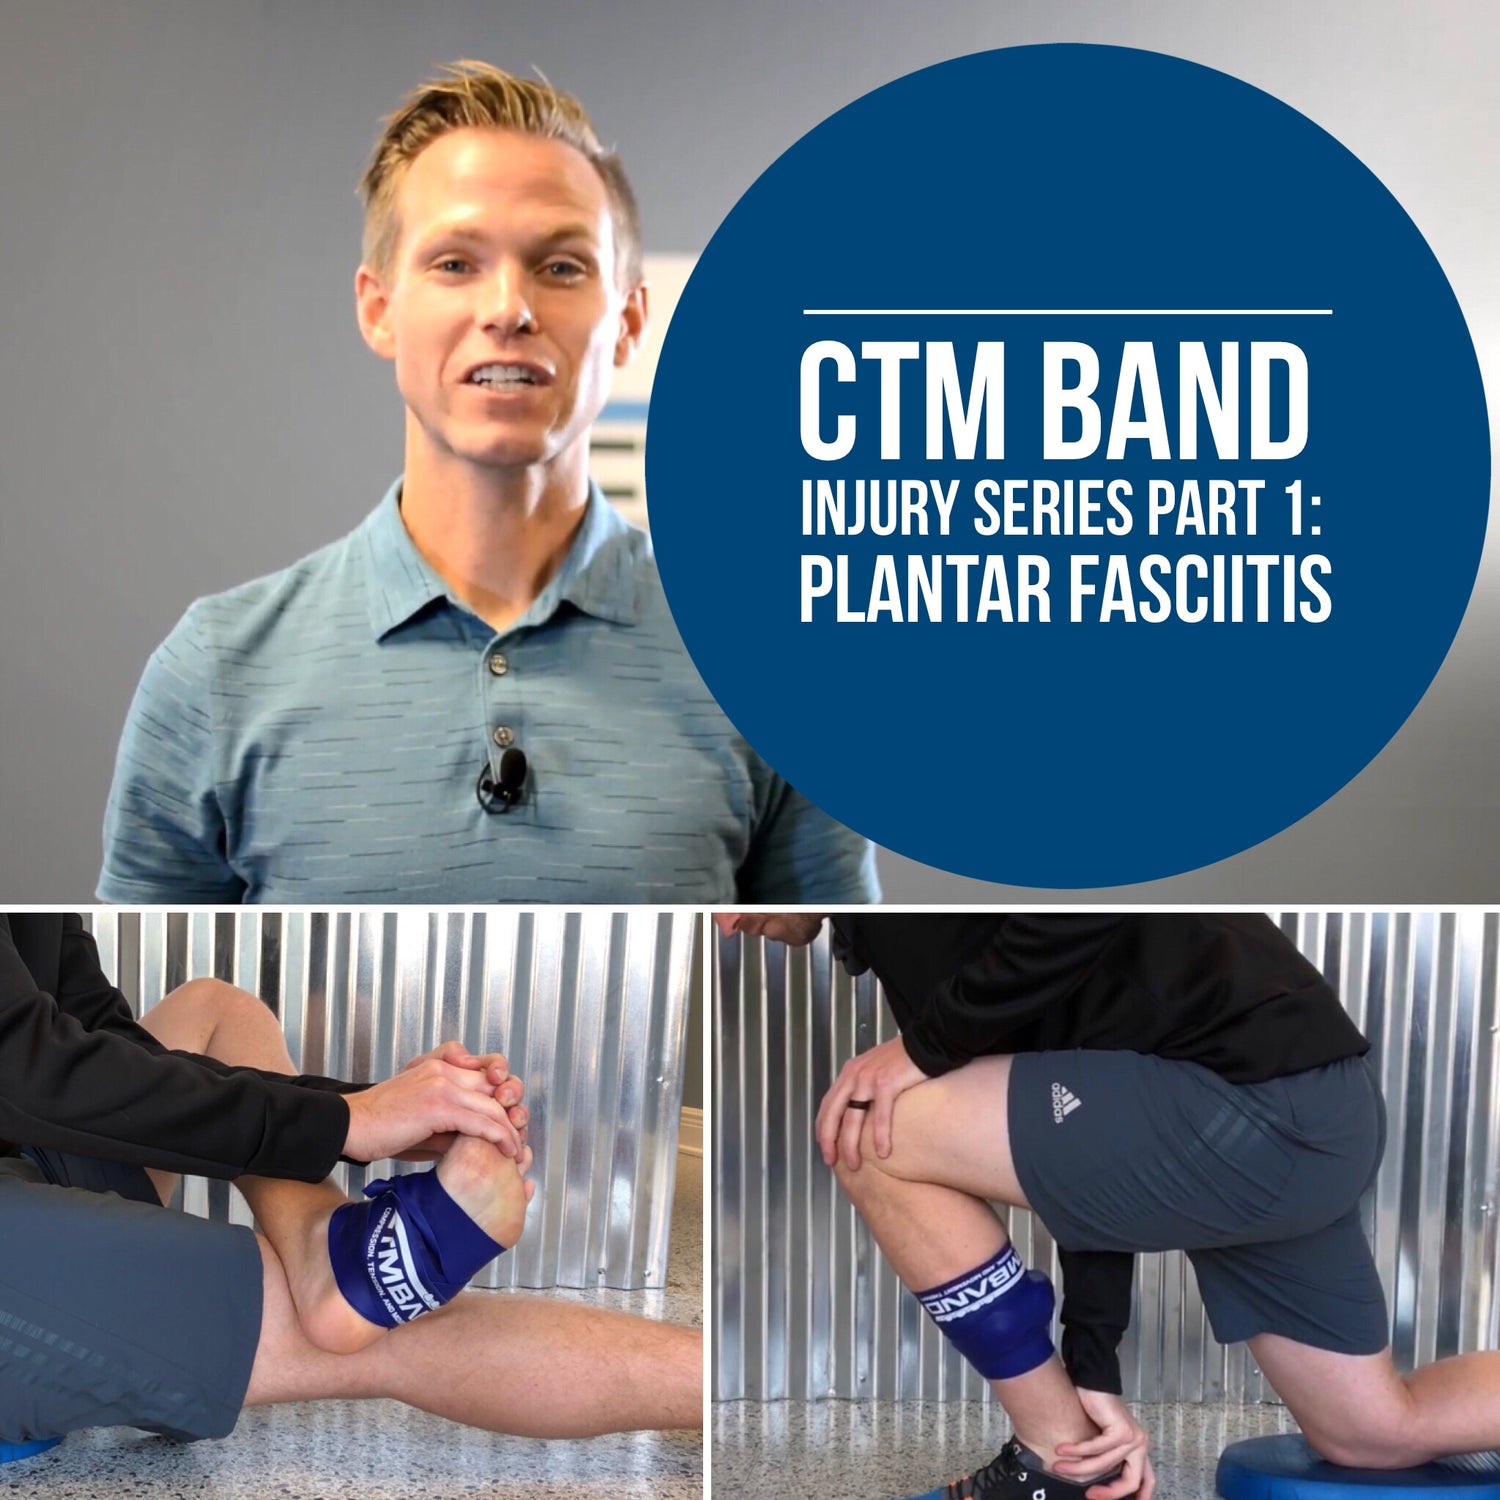 Image. The CTM Band is a soft tissue massage tool, achilles massage tool, hamstring massage tool, etc. It helps with pain on top of kneecap, patellofemoral pain syndrome, sore knees from running and many others. Better than foam rolling calves.